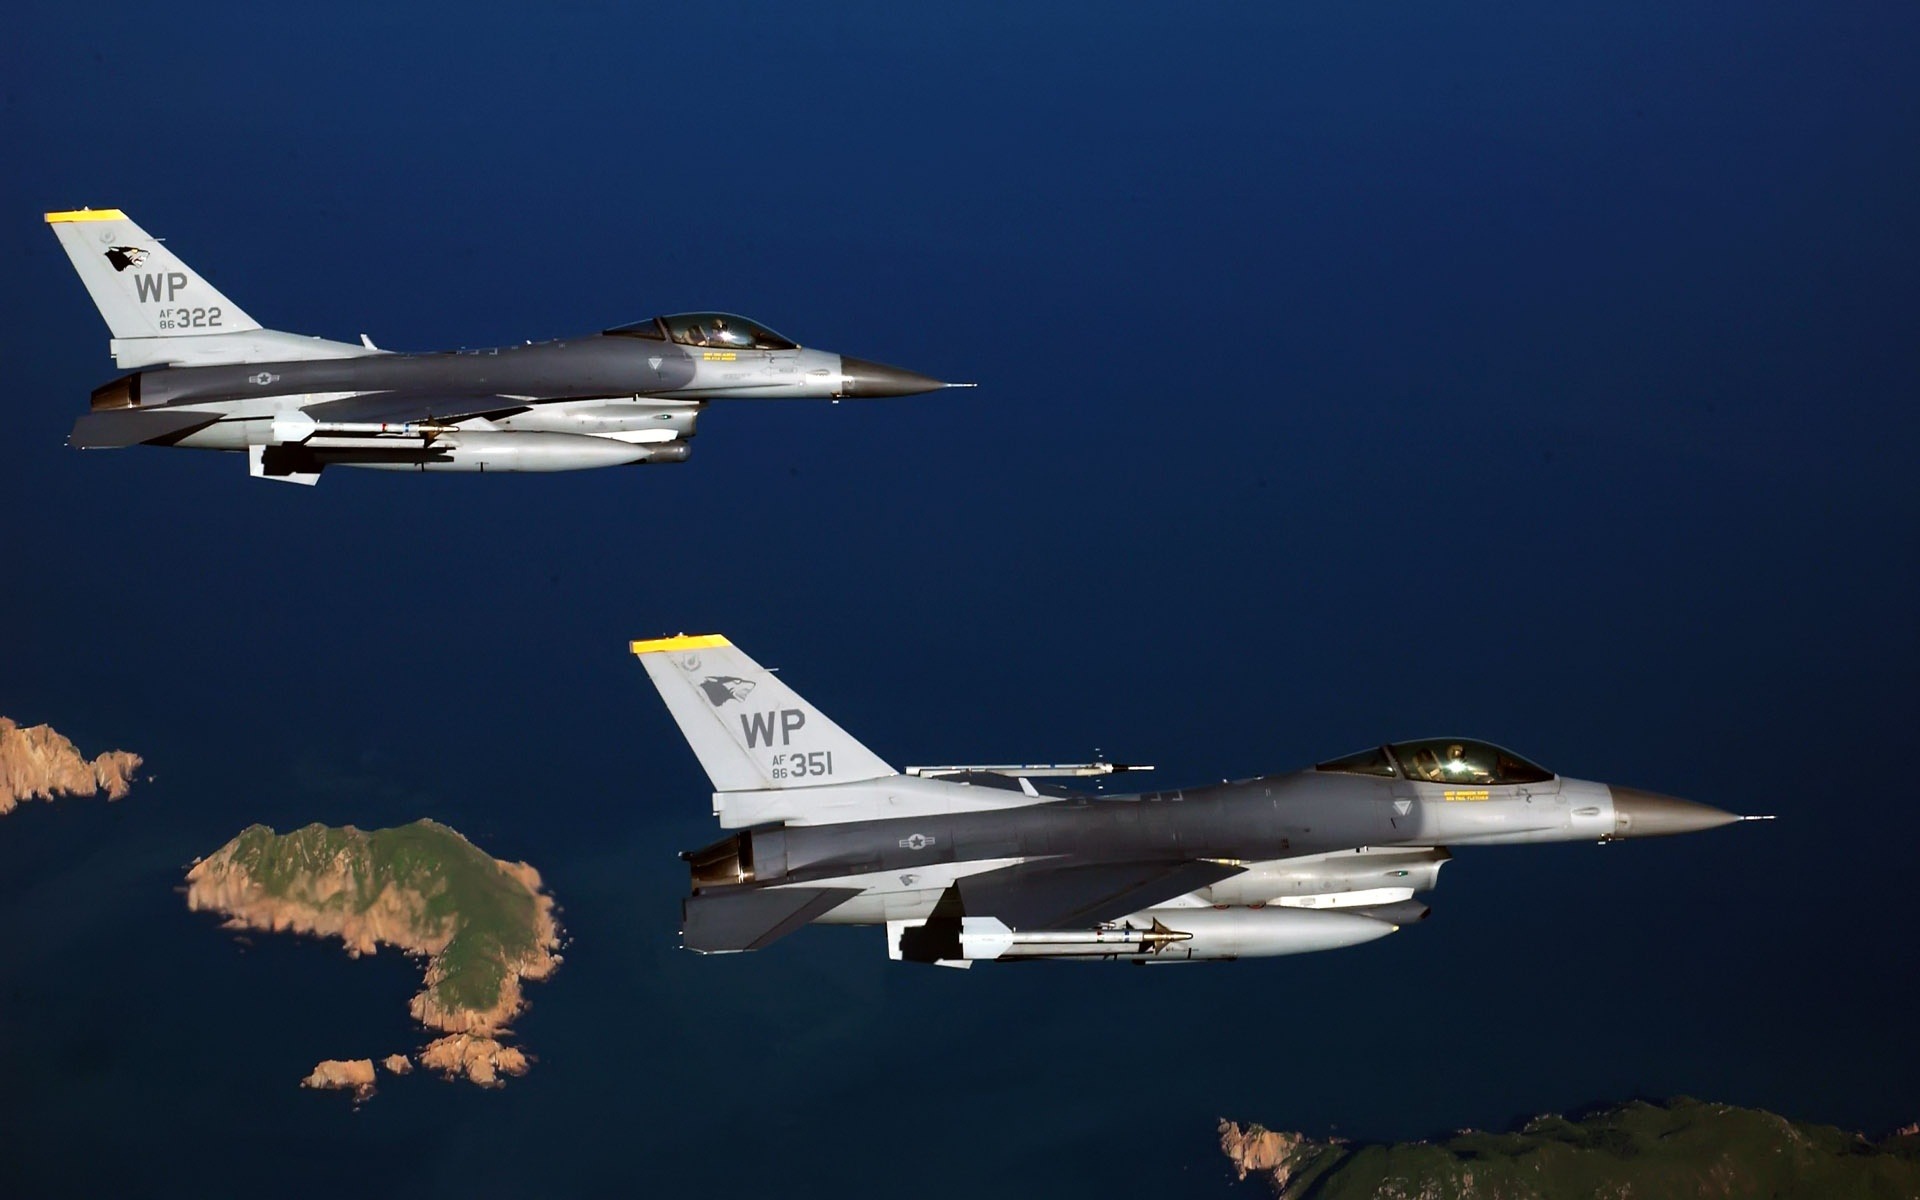 Two F 16 Fighting Falcon Aircrafts Military Aircraft Hd Wallpaper 19x10 Wallpapers13 Com